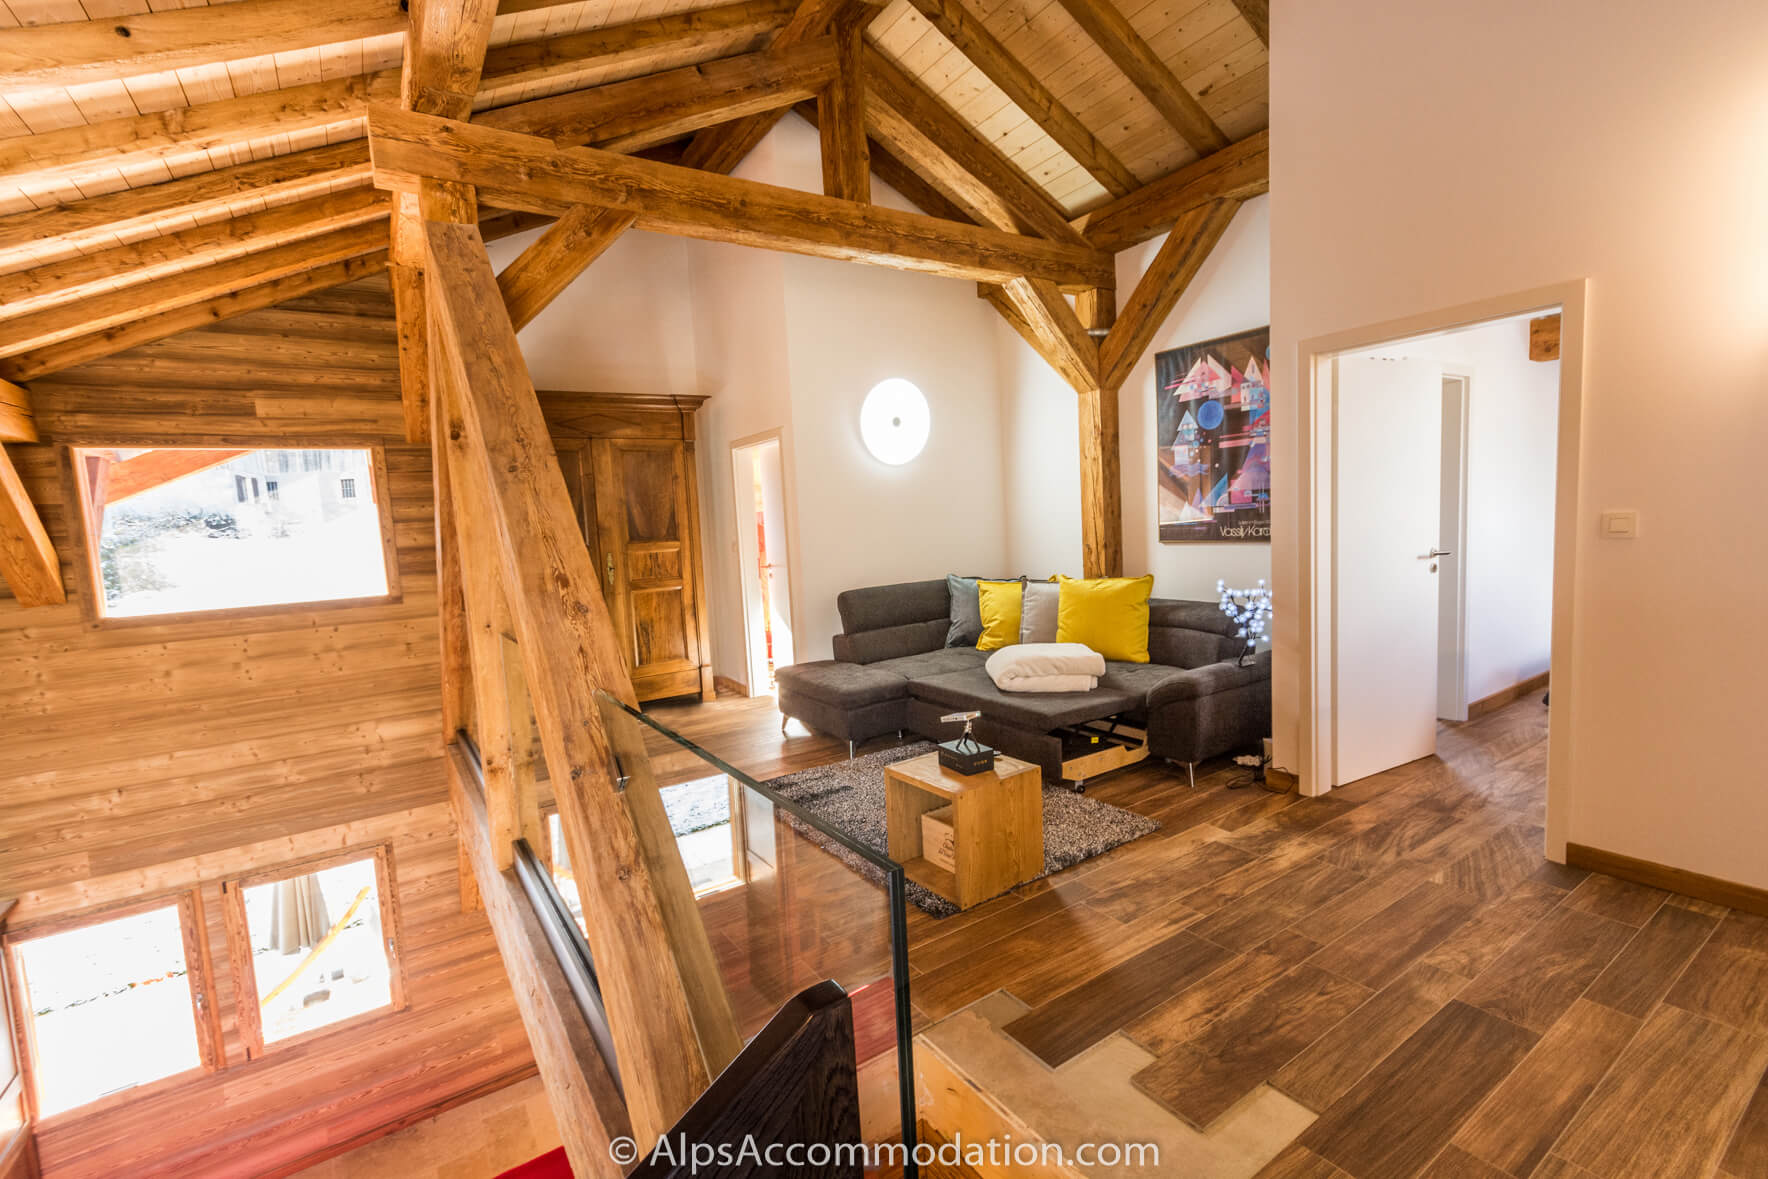 Chalet Sole Mio Morillon - The mezzanine area with sofa bed offers the flexibility of a second living area or sleeping area